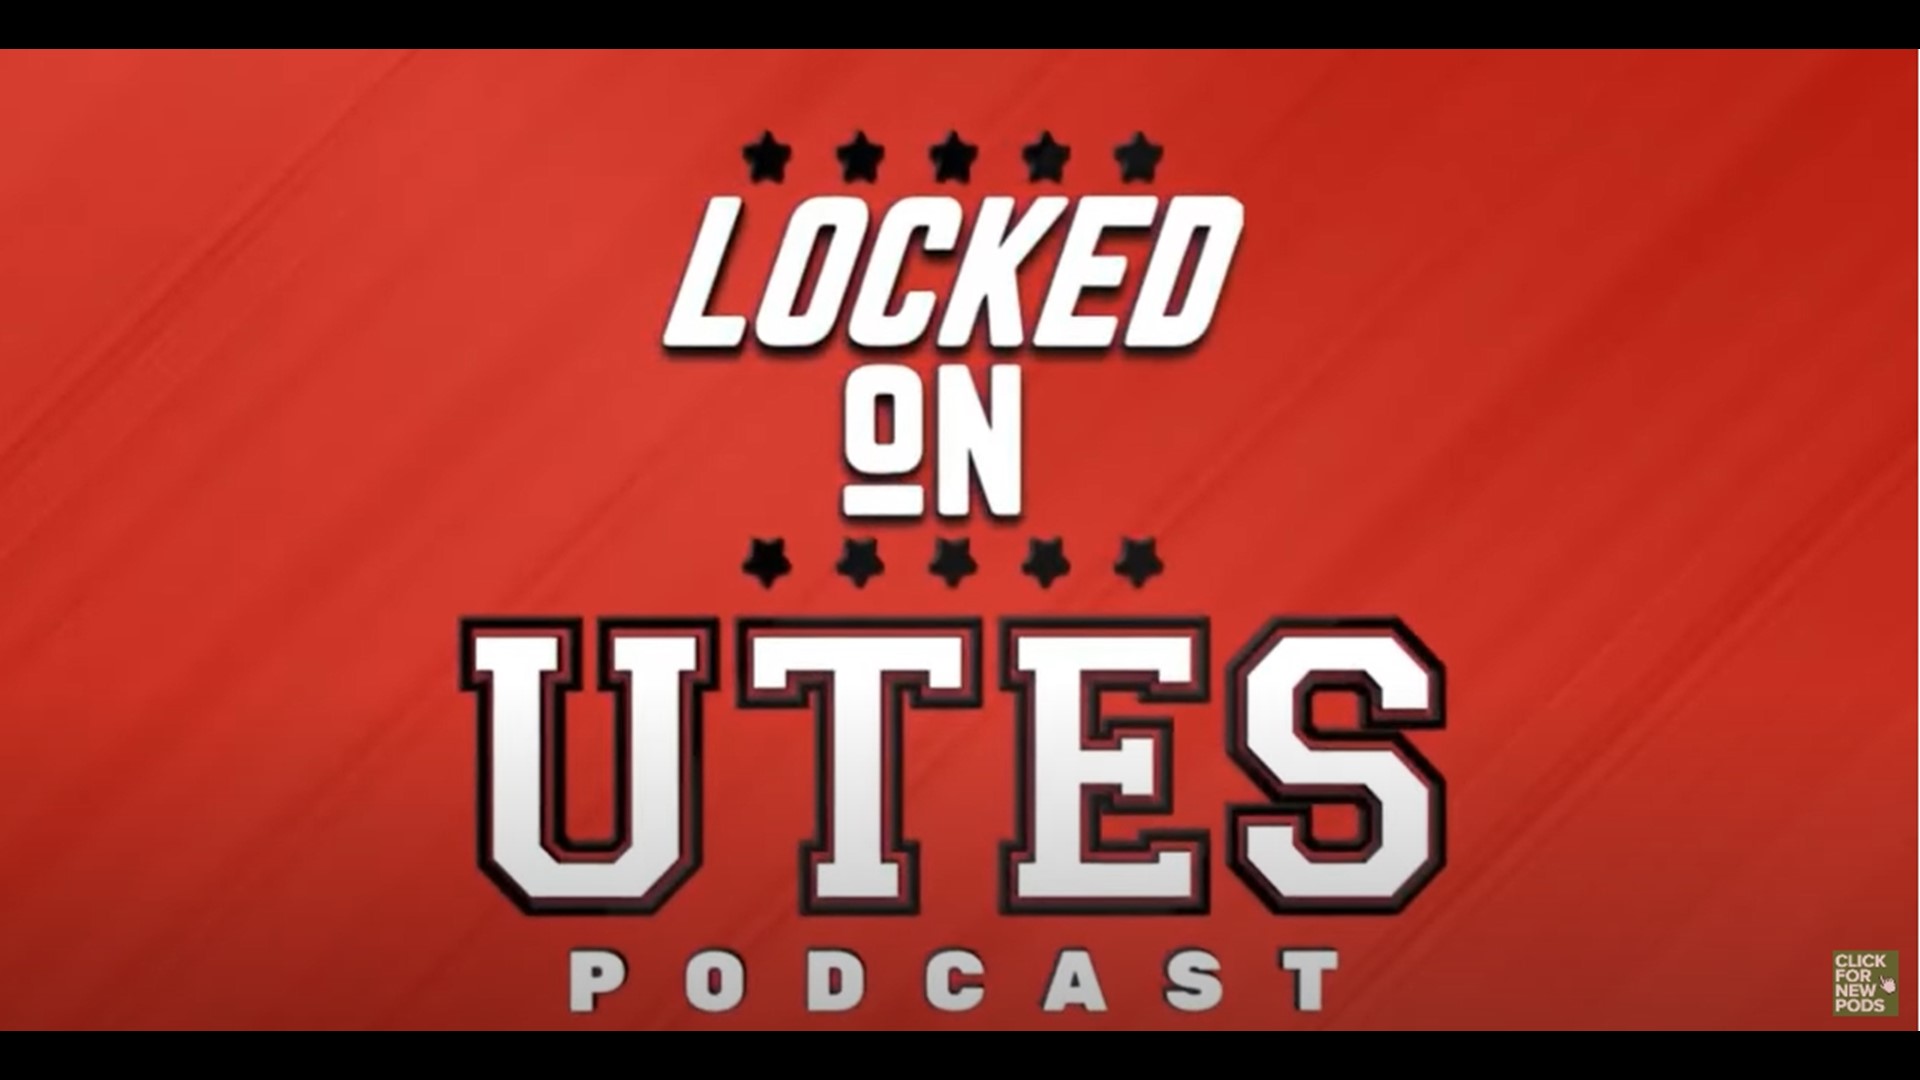 With the Colorado Buffalos having left for the Big-12, should Utah Football panic about staying in the Pac-12? Should the Utah Utes leave the Pac-12 if they can?